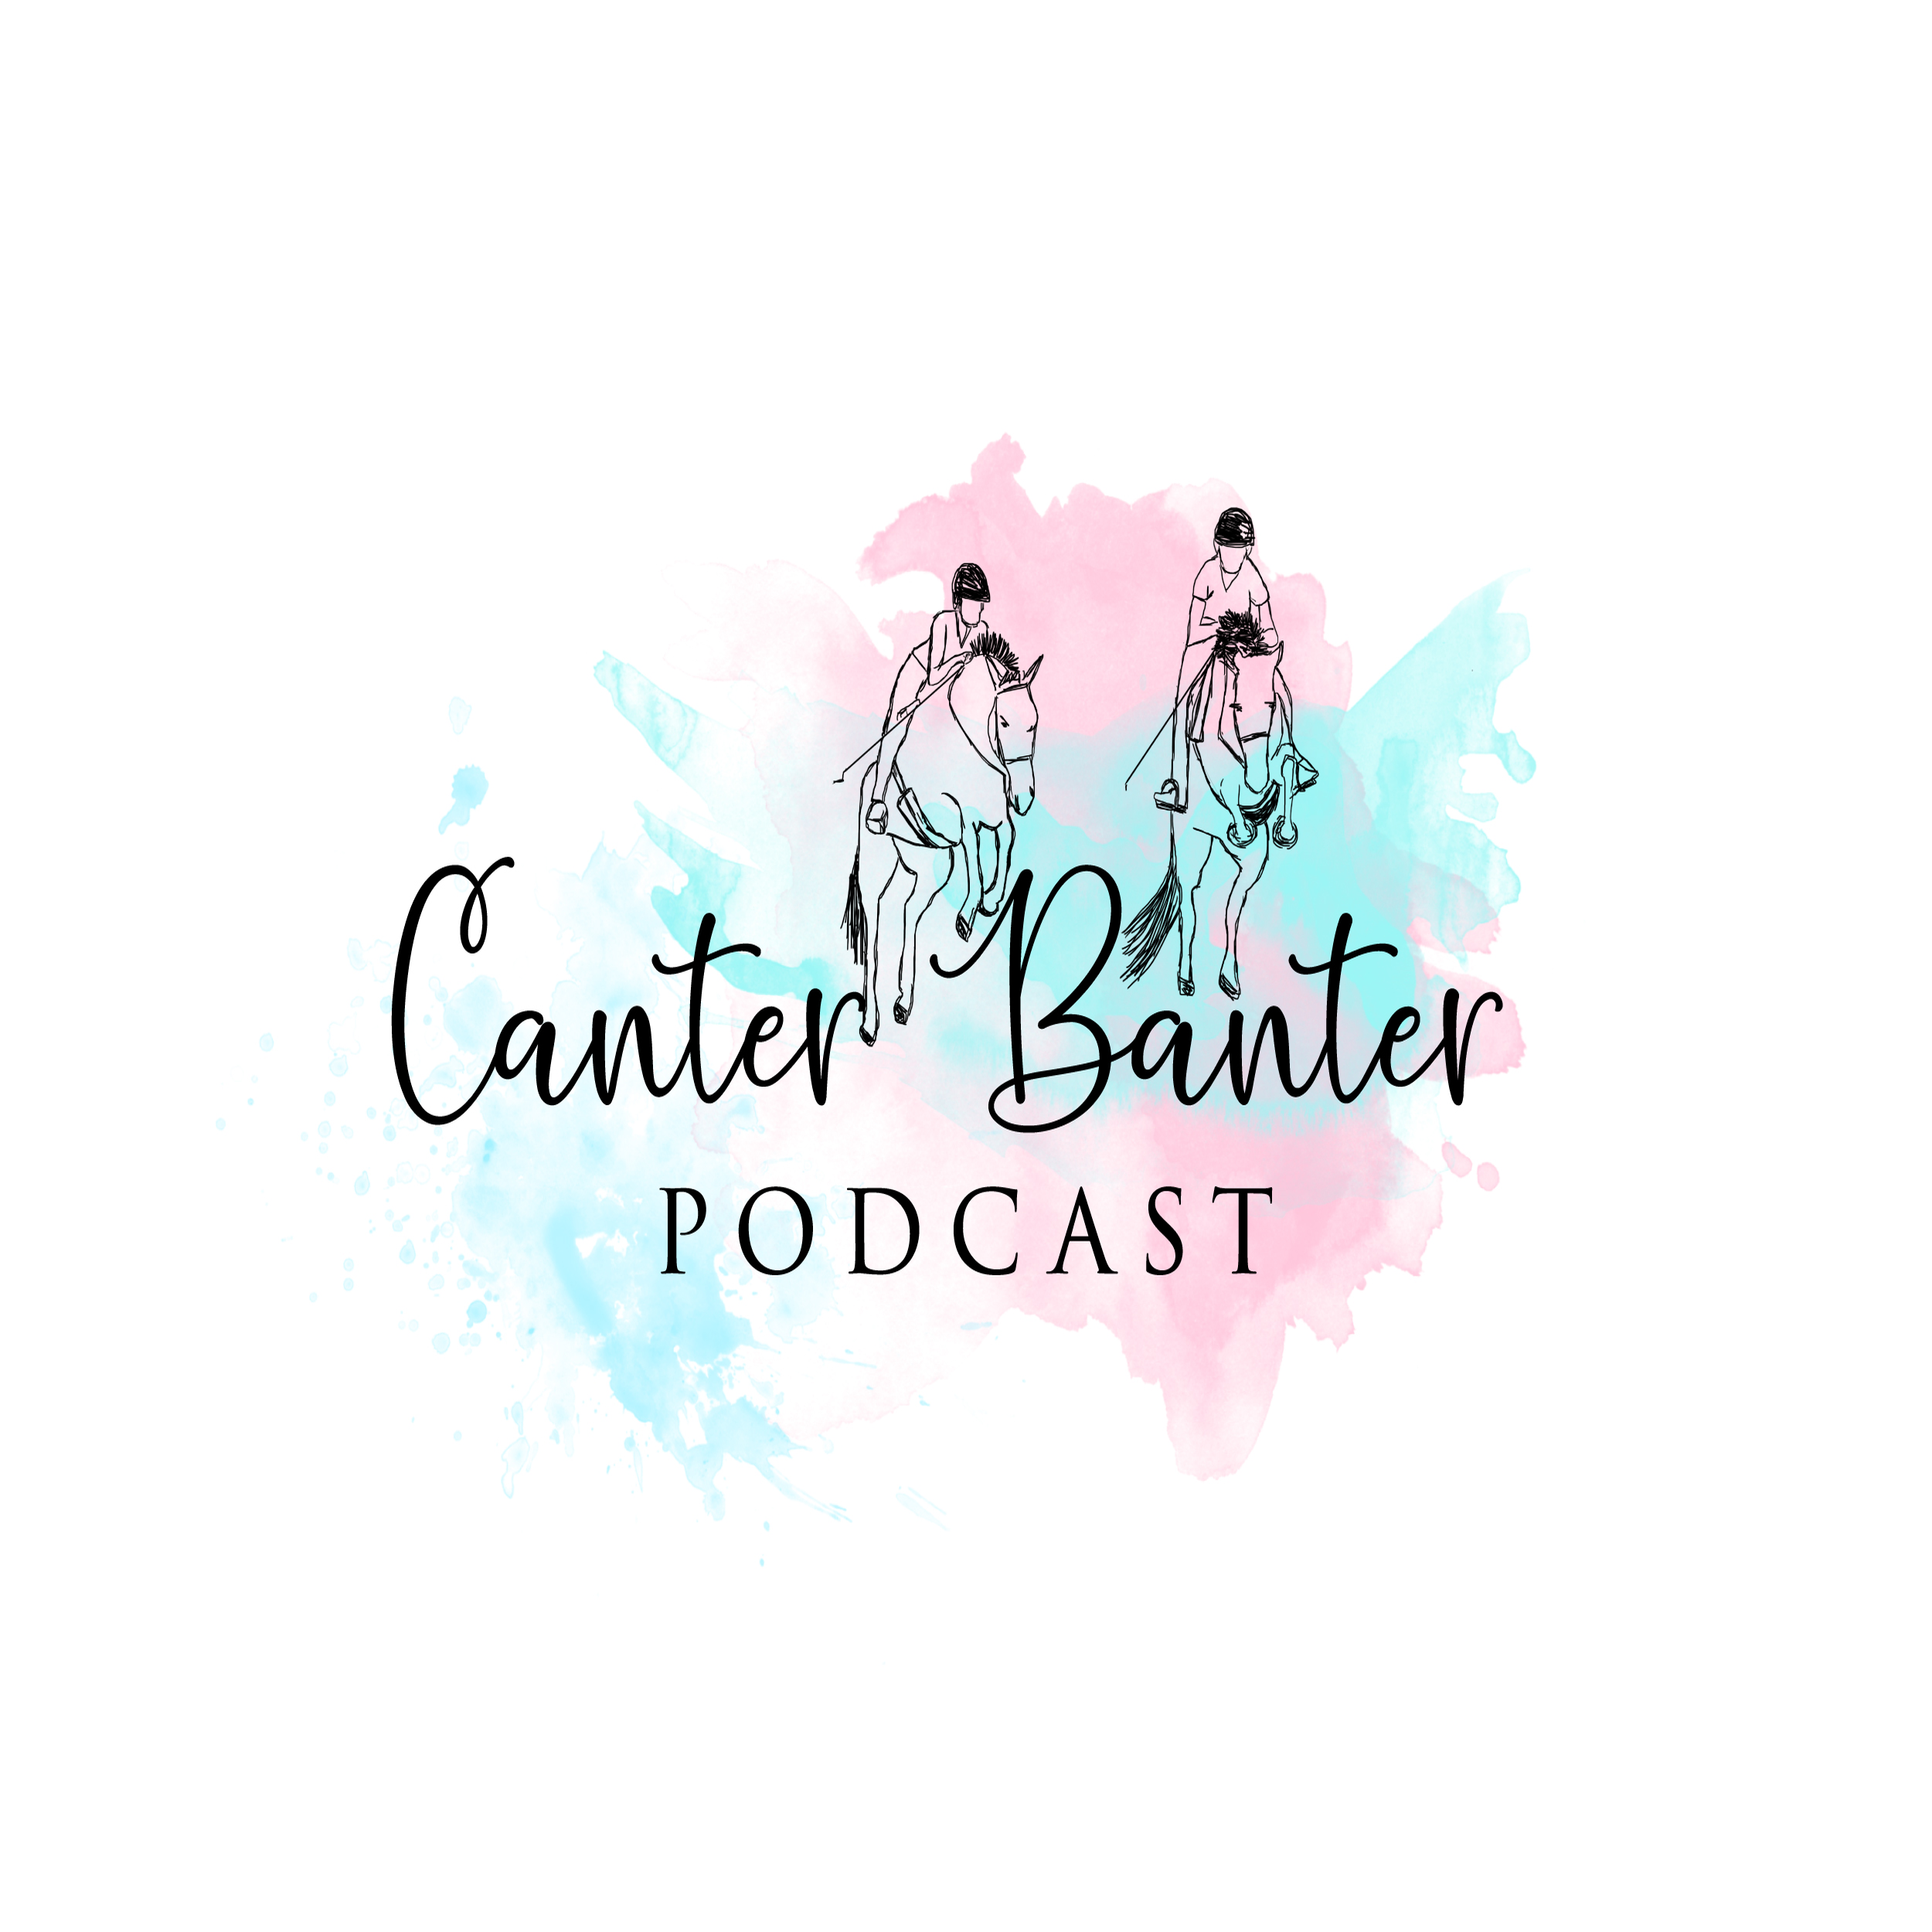 Canter Banter Podcast podcast show image